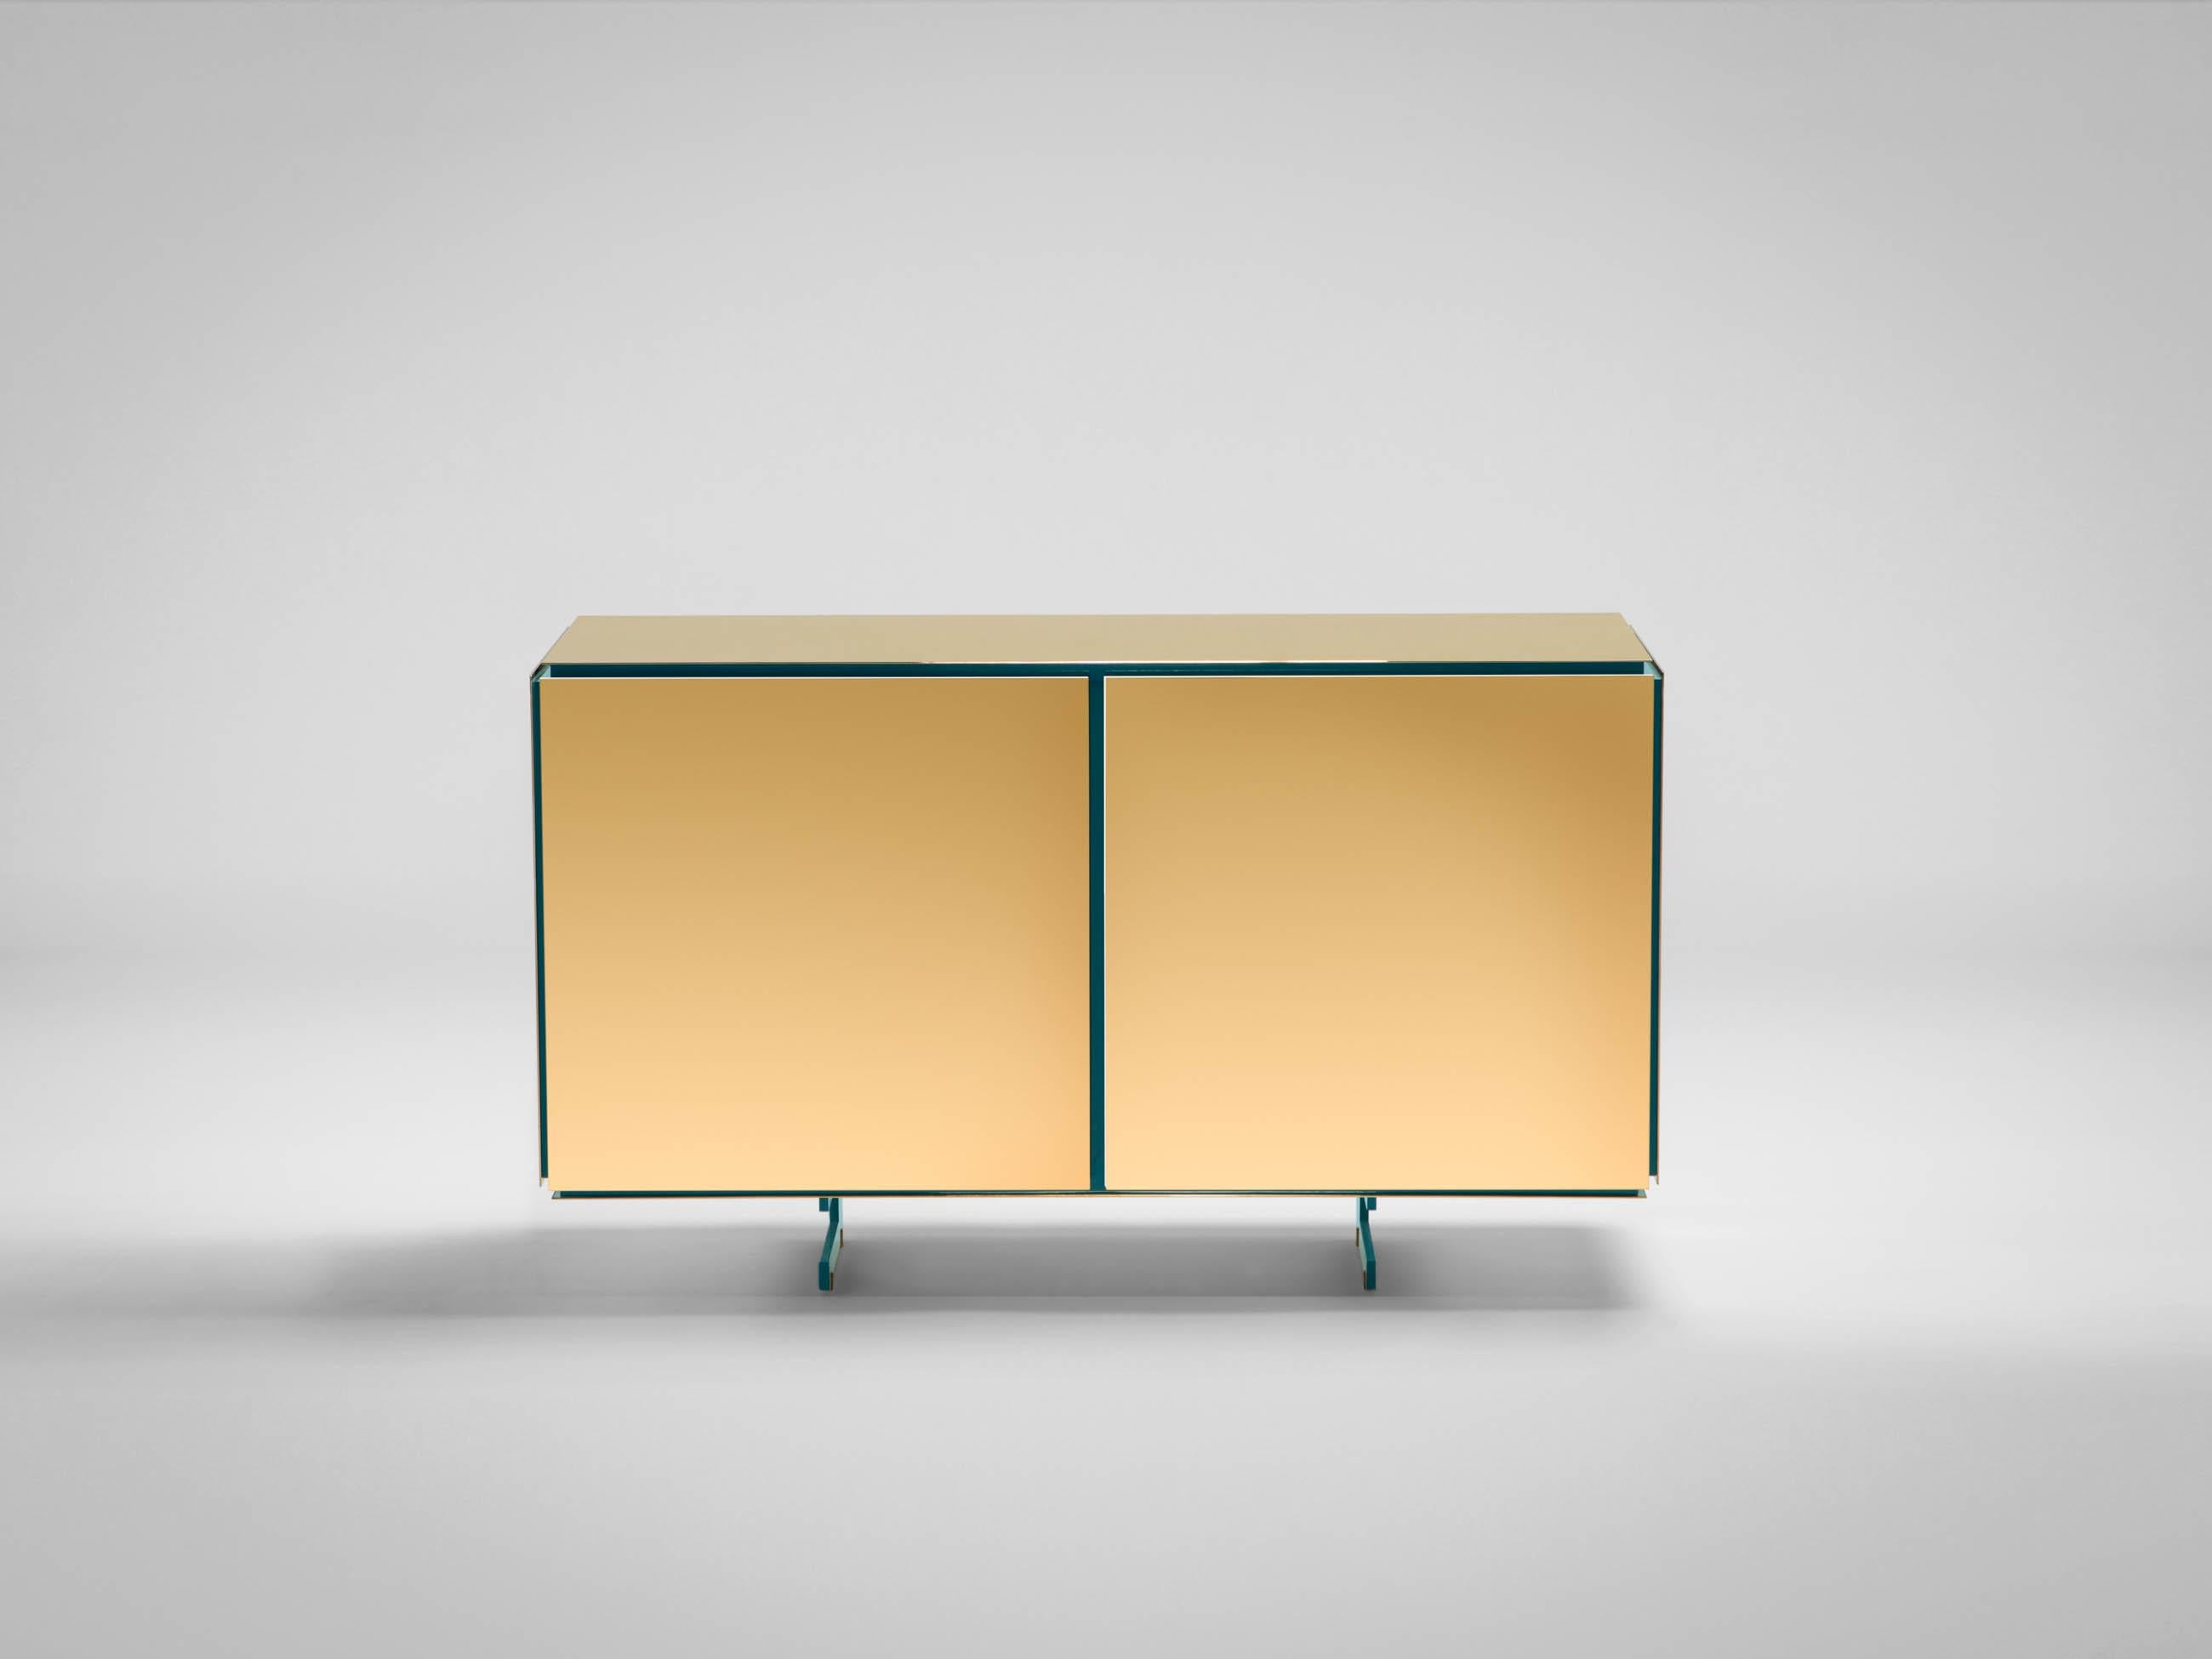 Gold Sideboard by SEM
Dimensions: W 120 x D 42 x H 70 cm
Materials: Polished or fine brushed 24kt yellow gold plated, Inlays in lacquered wood

SEM is a new brand of home furnishings, designed and produced in Italy. The preview show at Milan